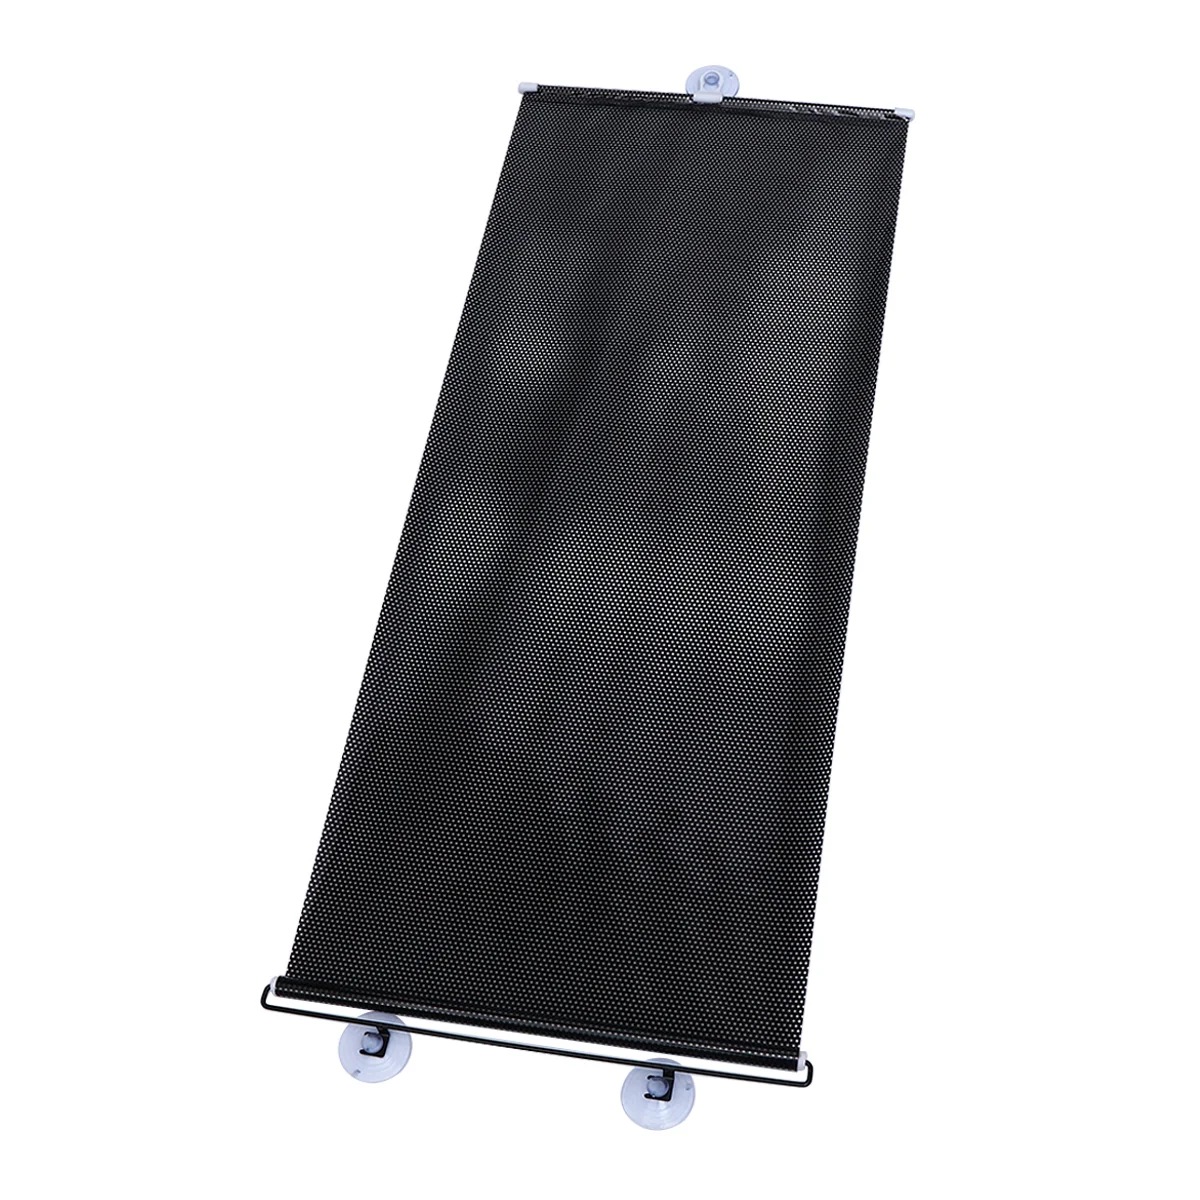 

Travel Blackout Curtains Window Panel Sunshades Car Curtain Blinds Door Window Blinds Suction Cup Blinds Wild Sunshade Film